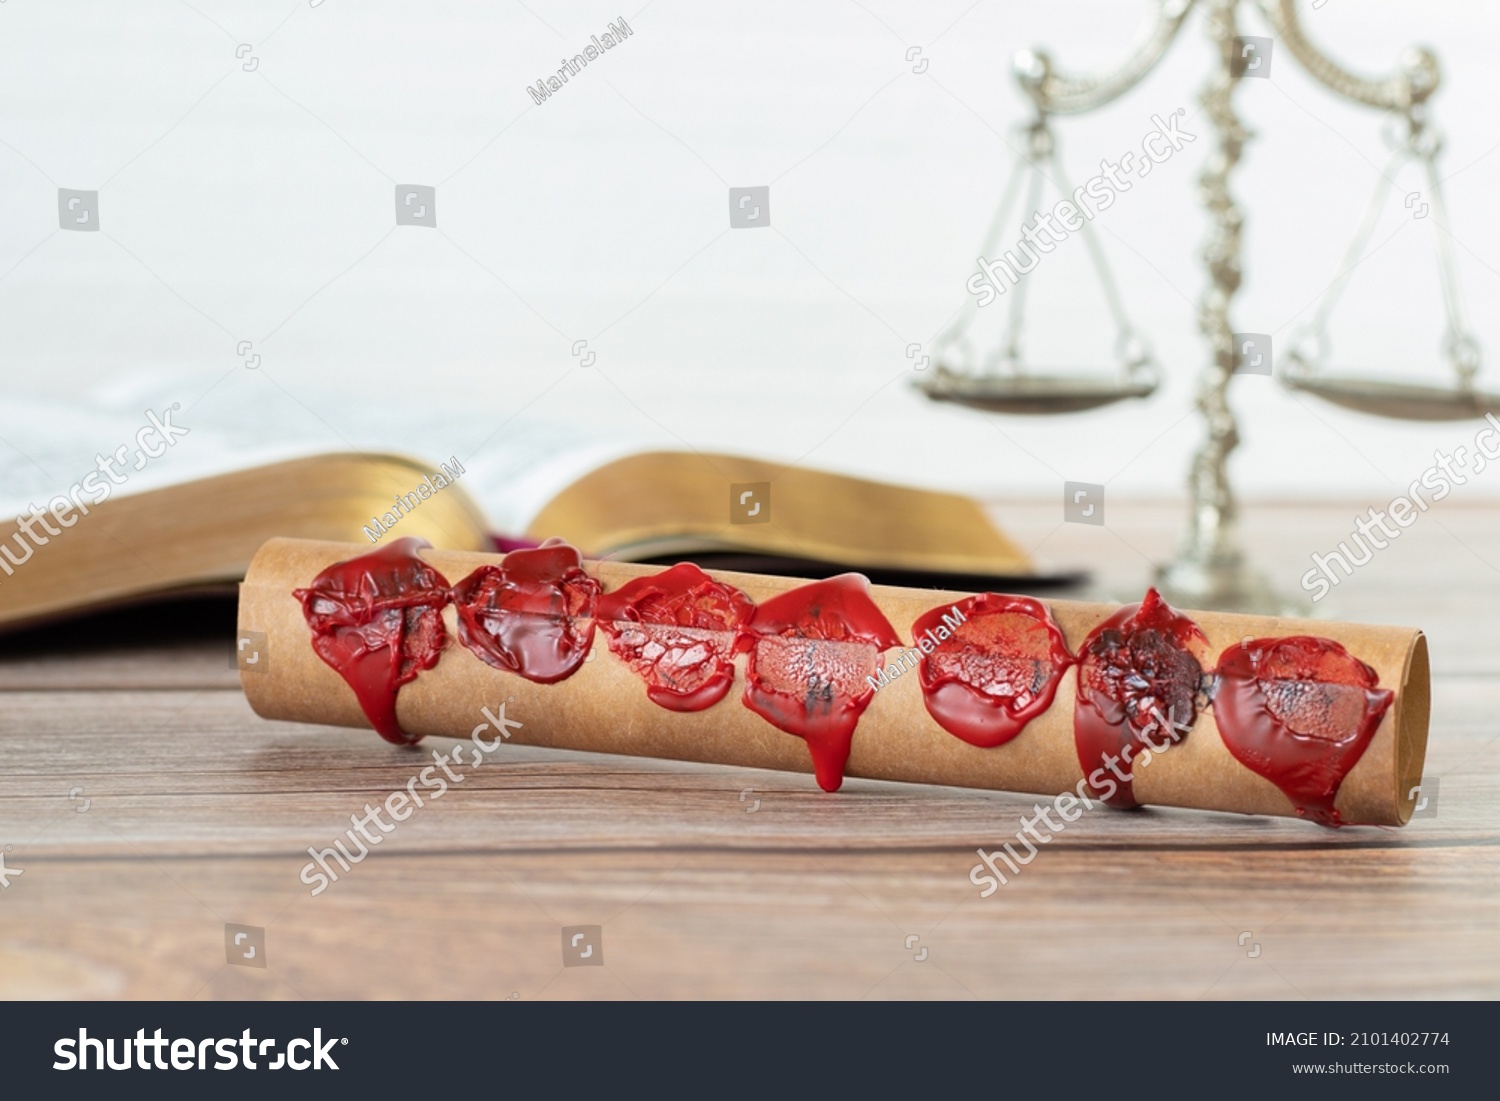 A closeup of an ancient closed scroll with seven seals on a wooden table with Holy Bible Book and old weighing scales against a white background. Christian biblical concept of Revelation's prophecy. #2101402774